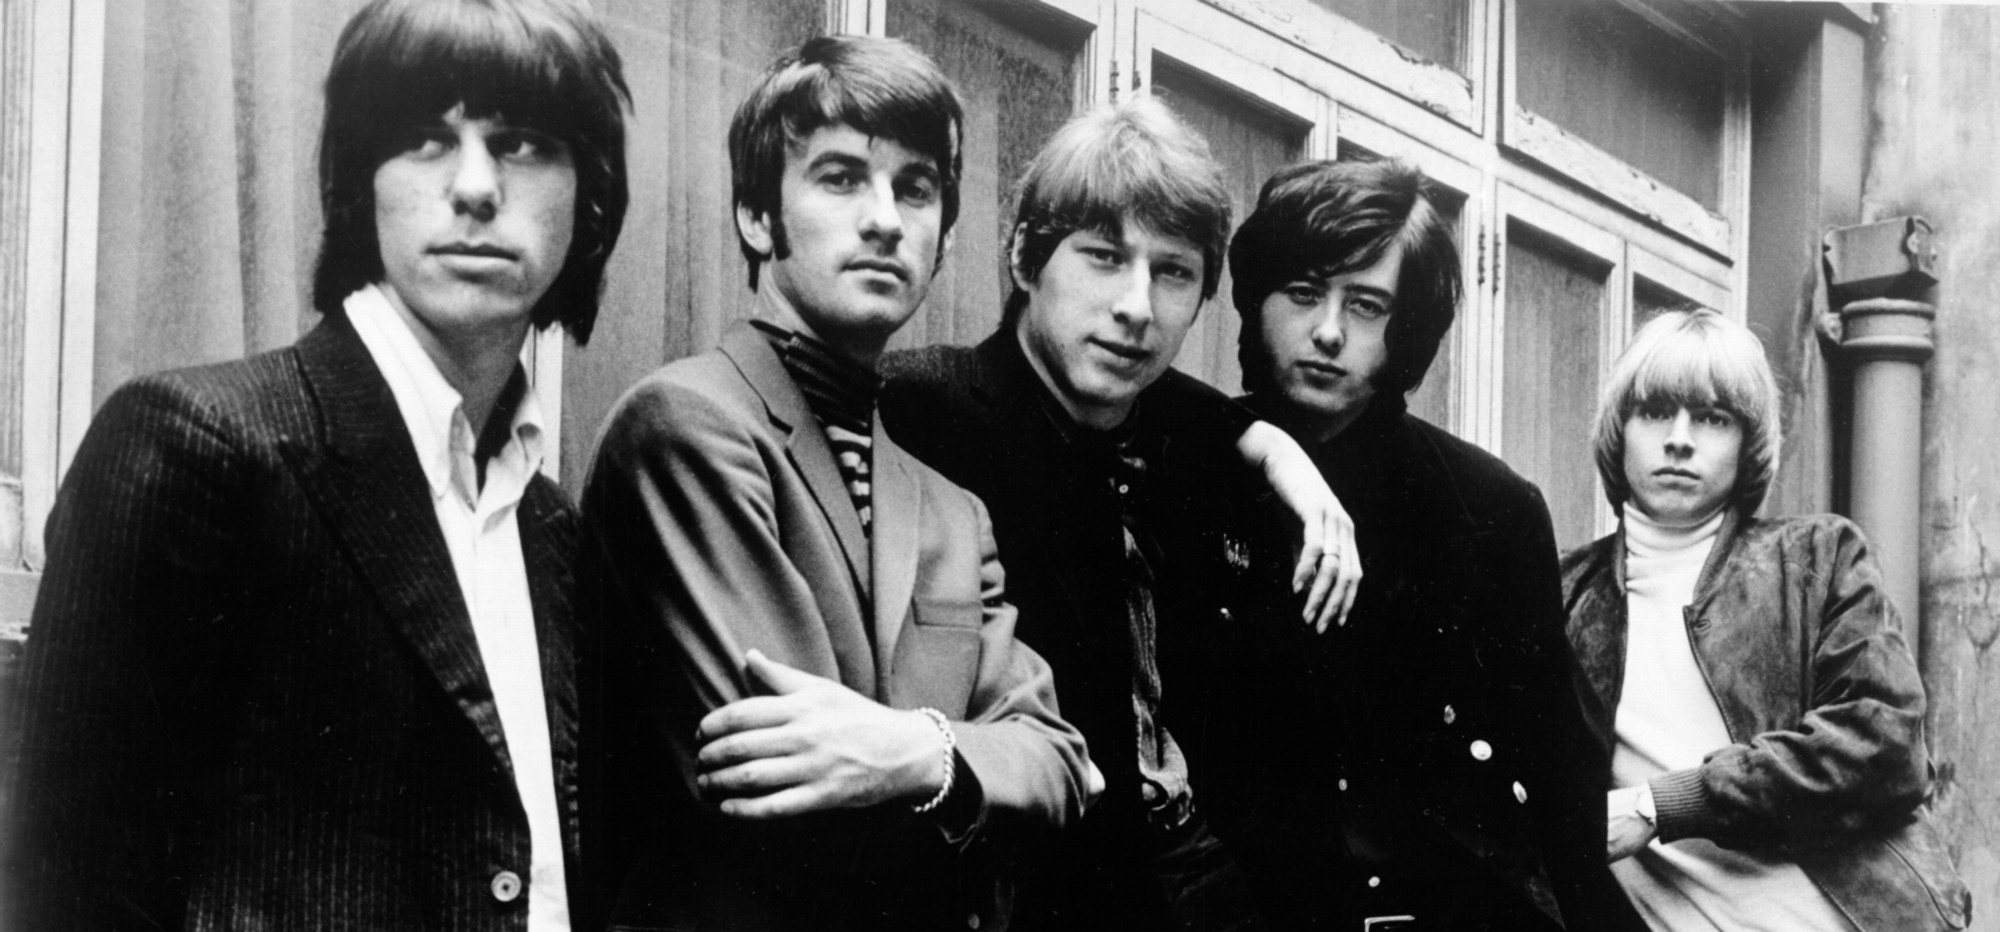 Yardbirds, The Archives - Repertoire Records